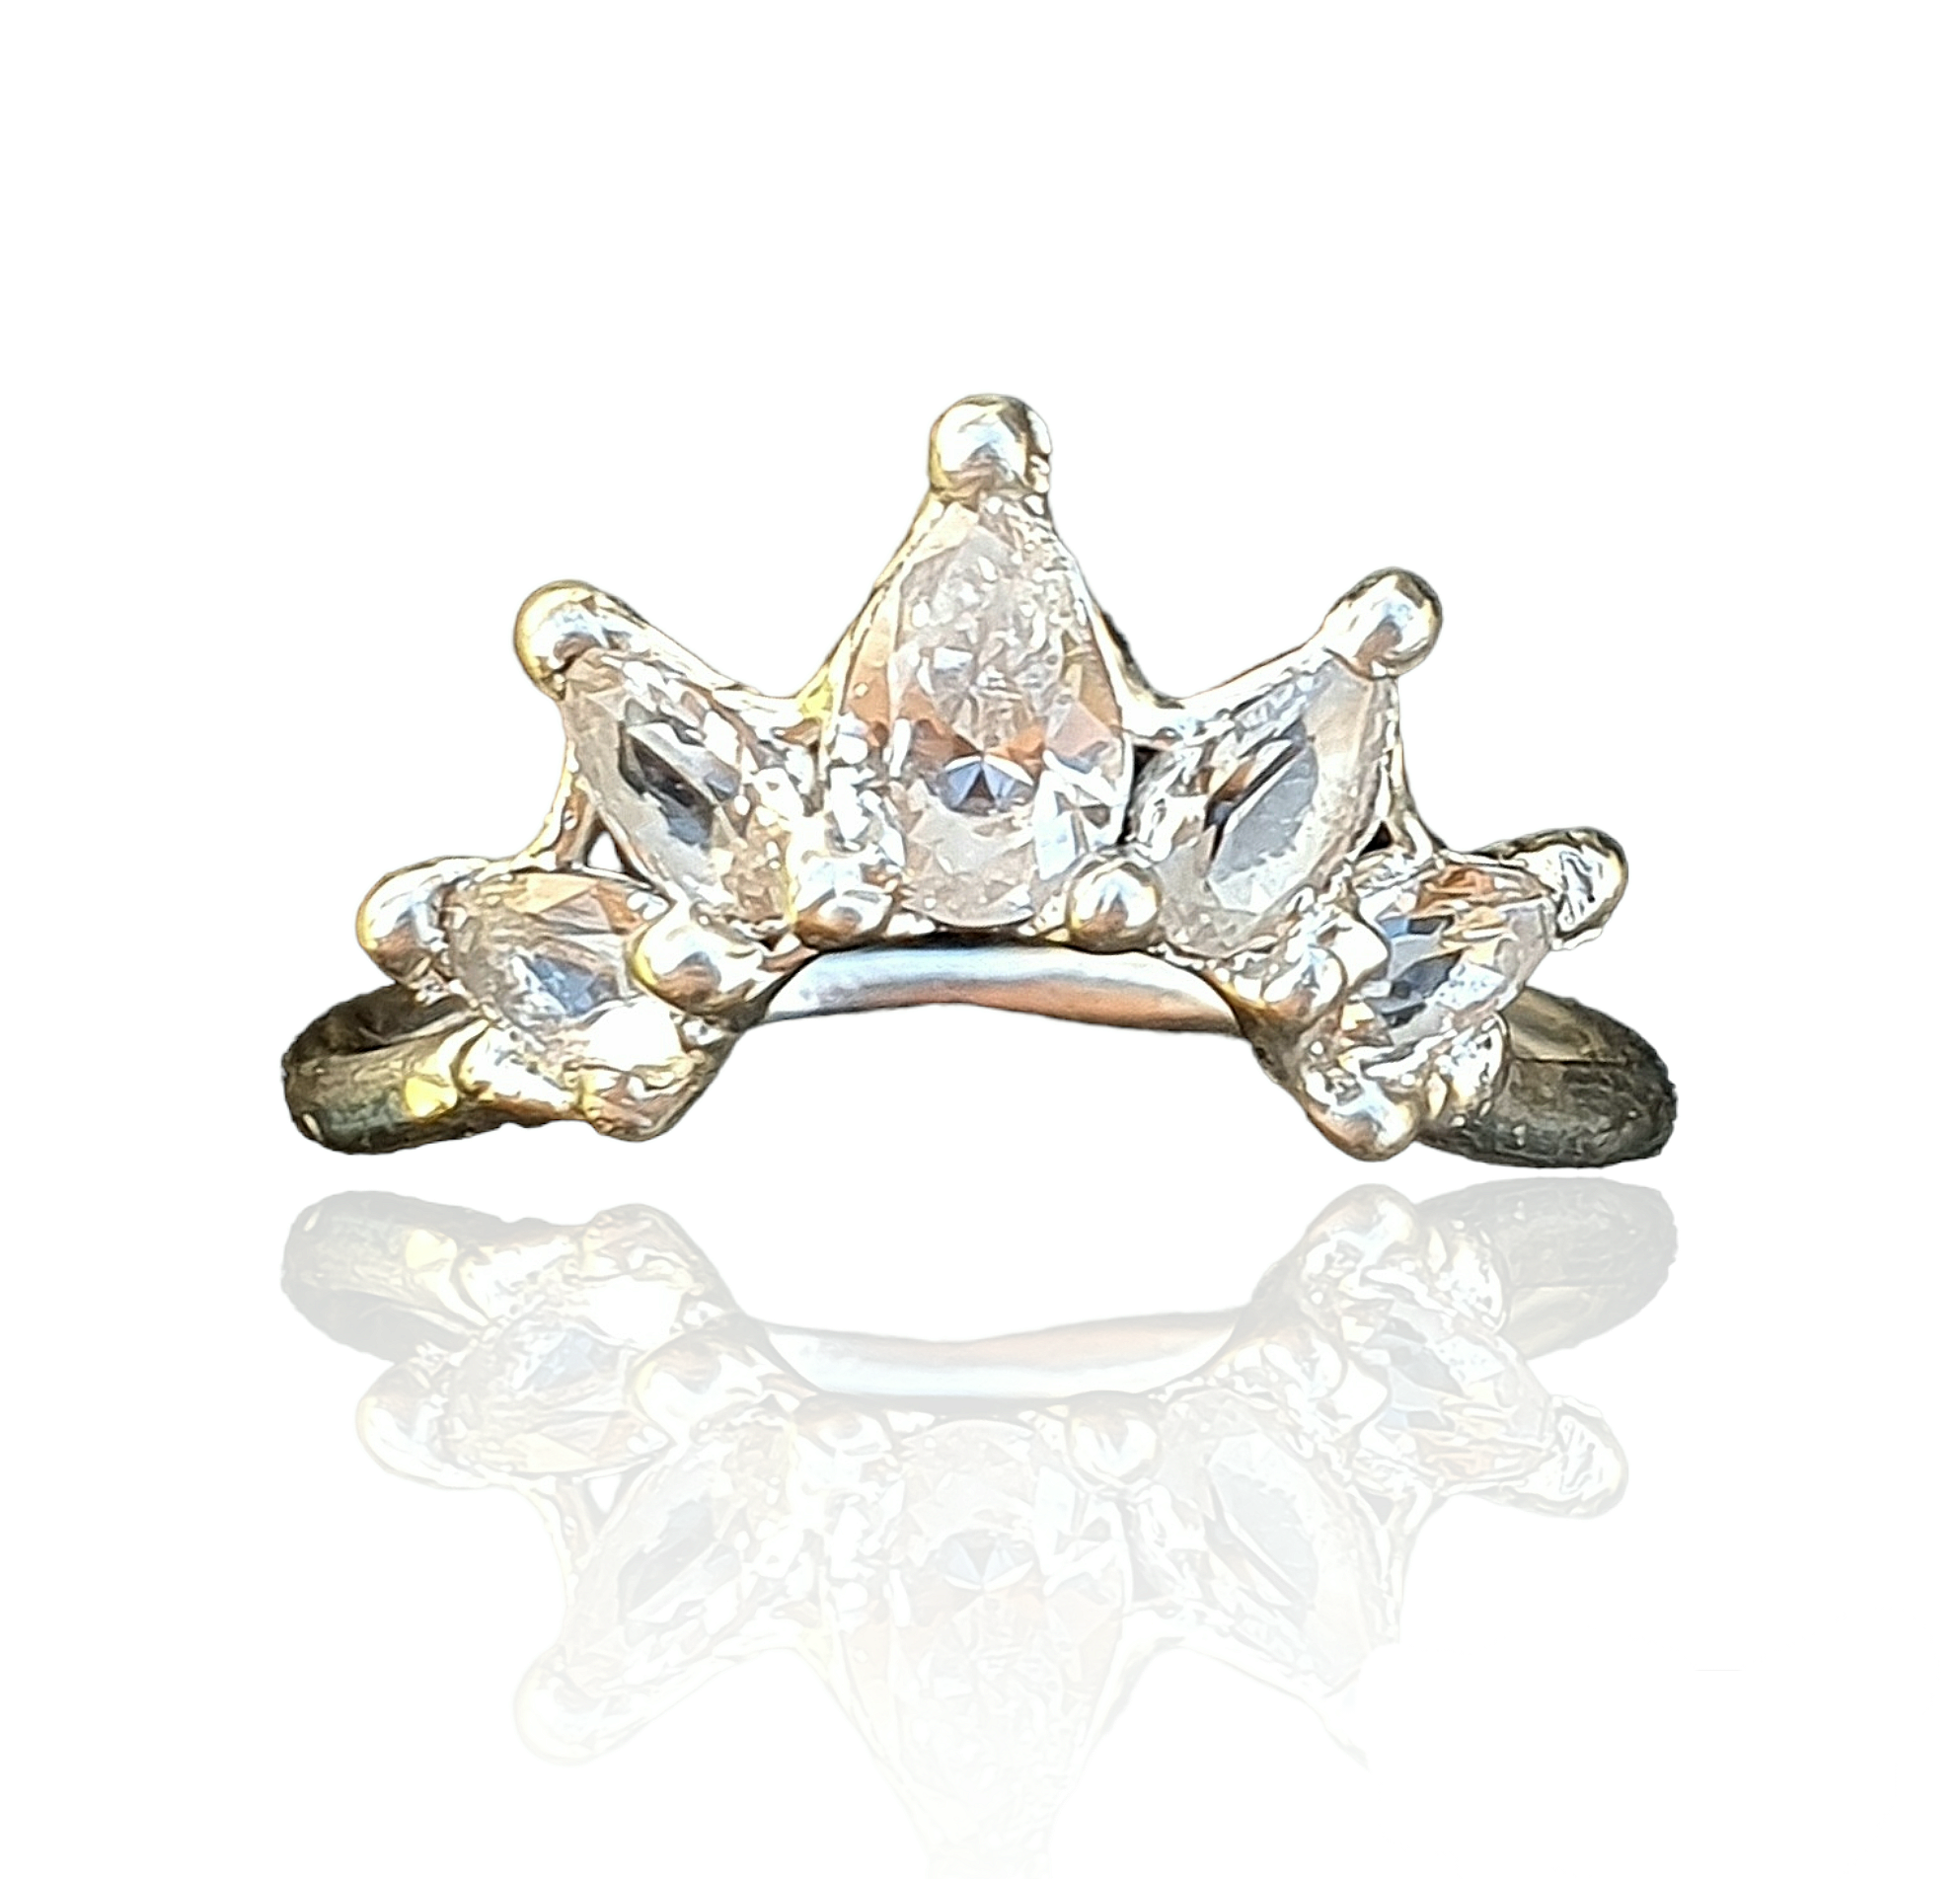 Astrid Crown Ring - Sterling silver and lab grown sapphire crown ring